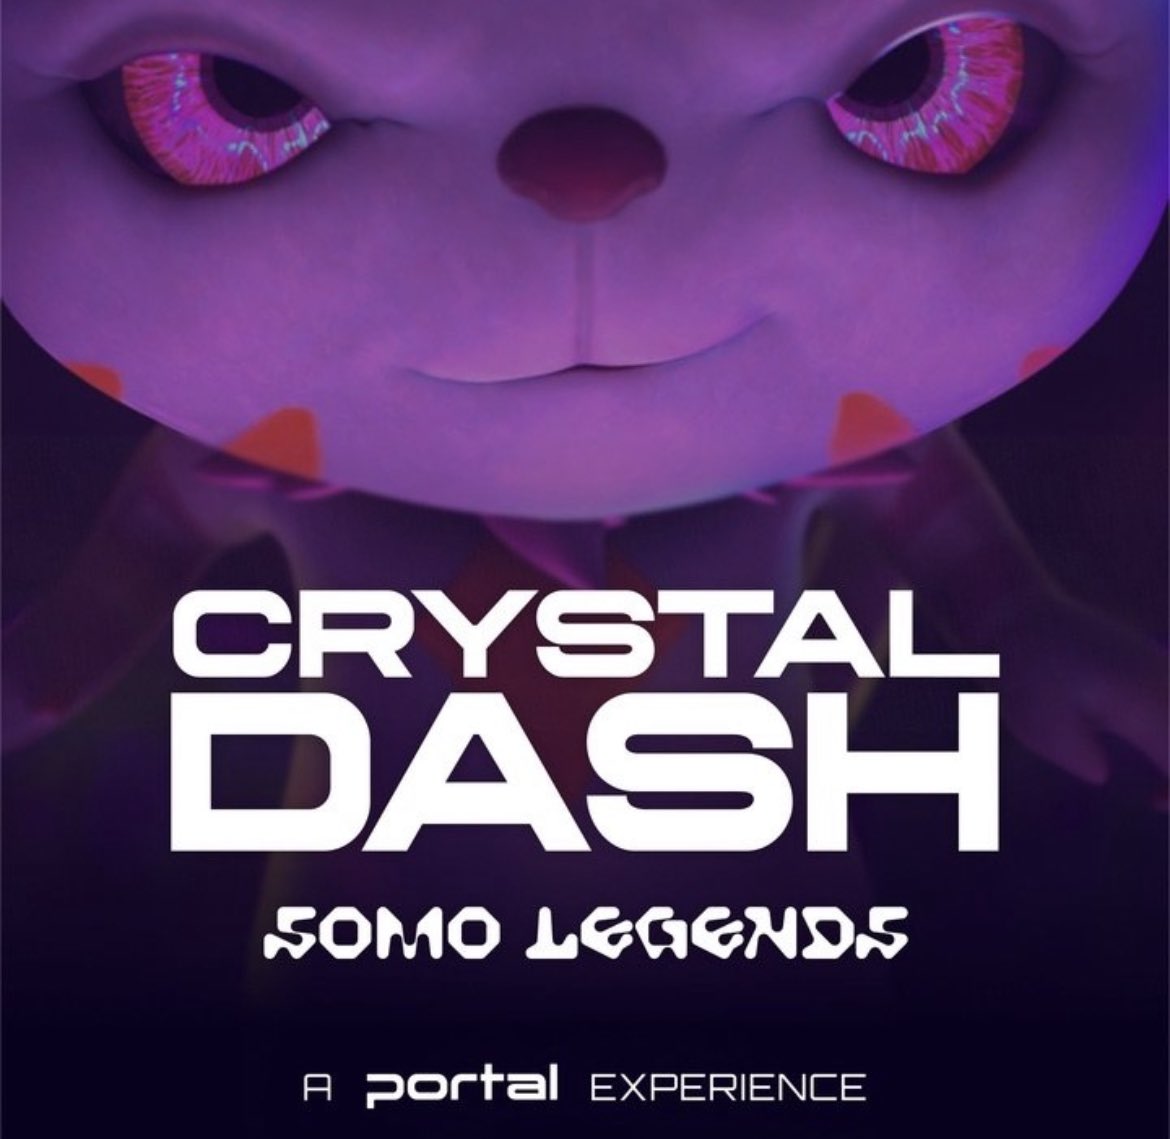 $SOMO farming is now LIVE on Crystal Dash! Featuring some awesome ways to earn $SOMO with minimum effort like changing your PFP to one of their cool SOMO’s (I picked the purple one) Start farming now 👇 somo.crystaldash.co